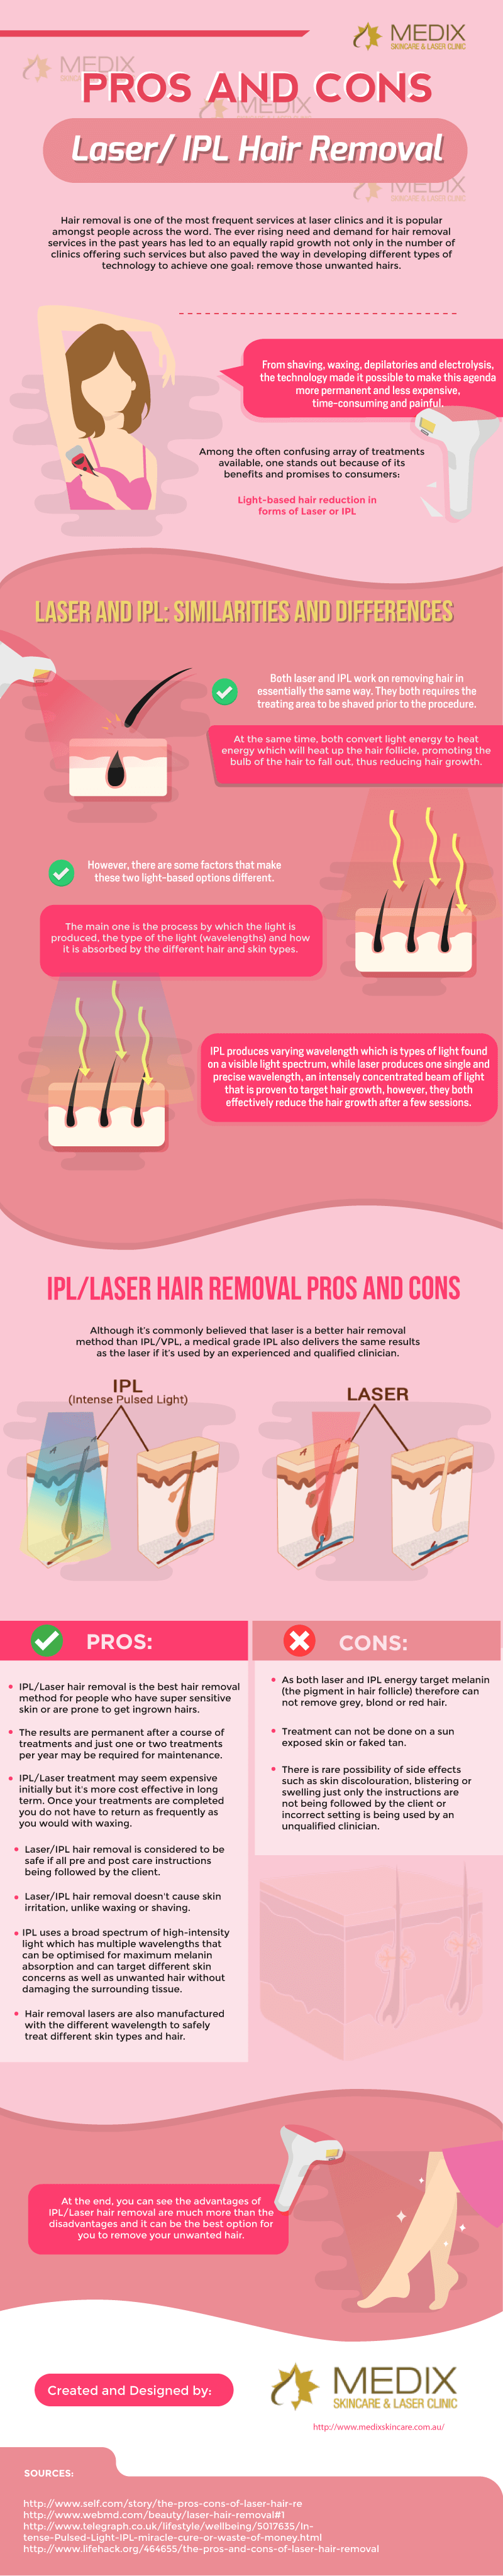 Pros-and-Cons-Laser-IPL-Hair-Removal